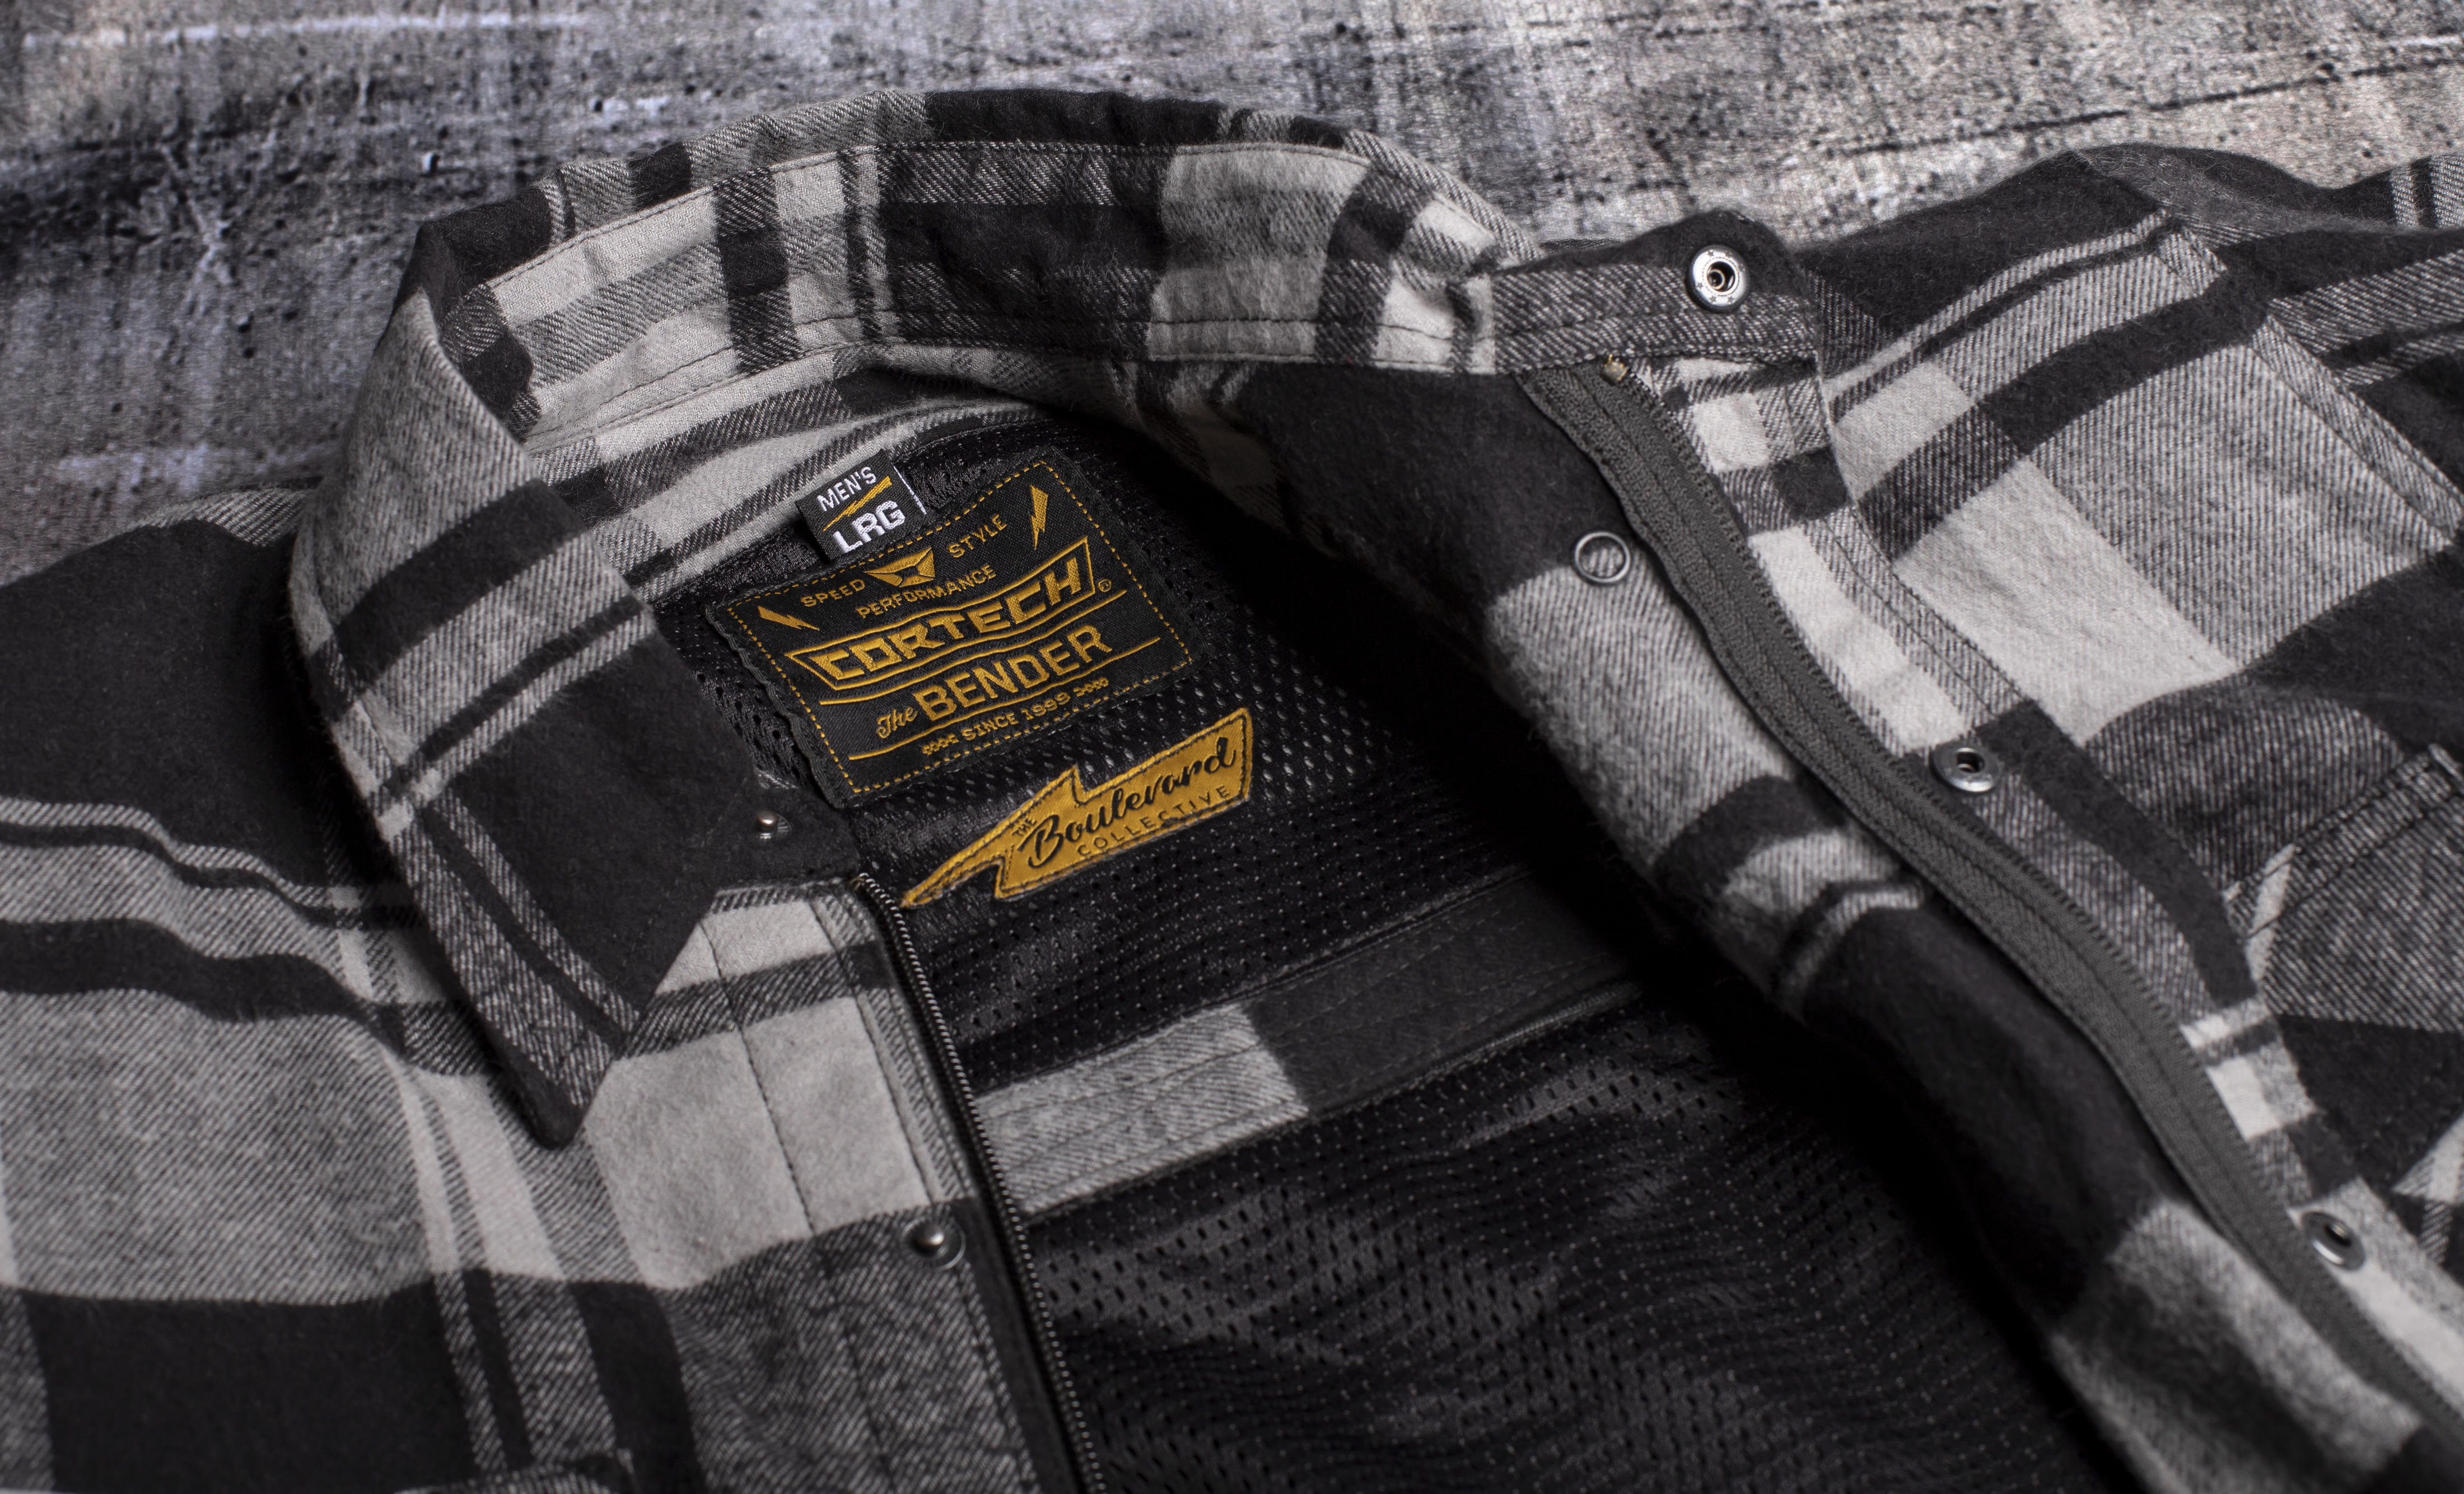 "The Bender" Men's Armored Riding Flannel Storm Grey Medium - Click Image to Close